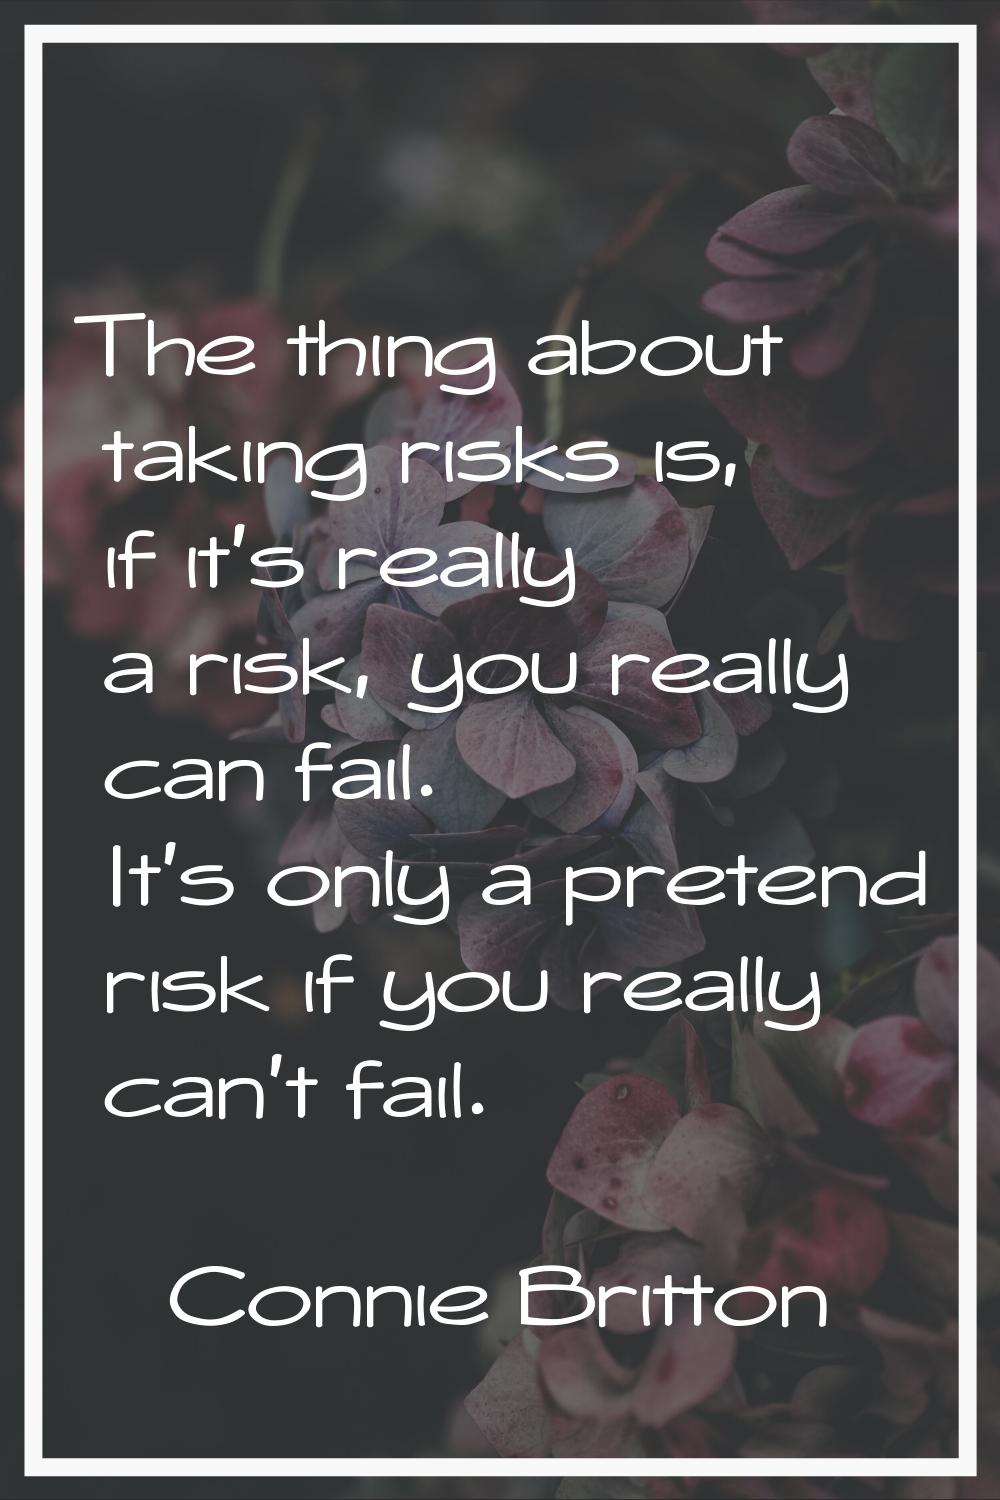 The thing about taking risks is, if it's really a risk, you really can fail. It's only a pretend ri